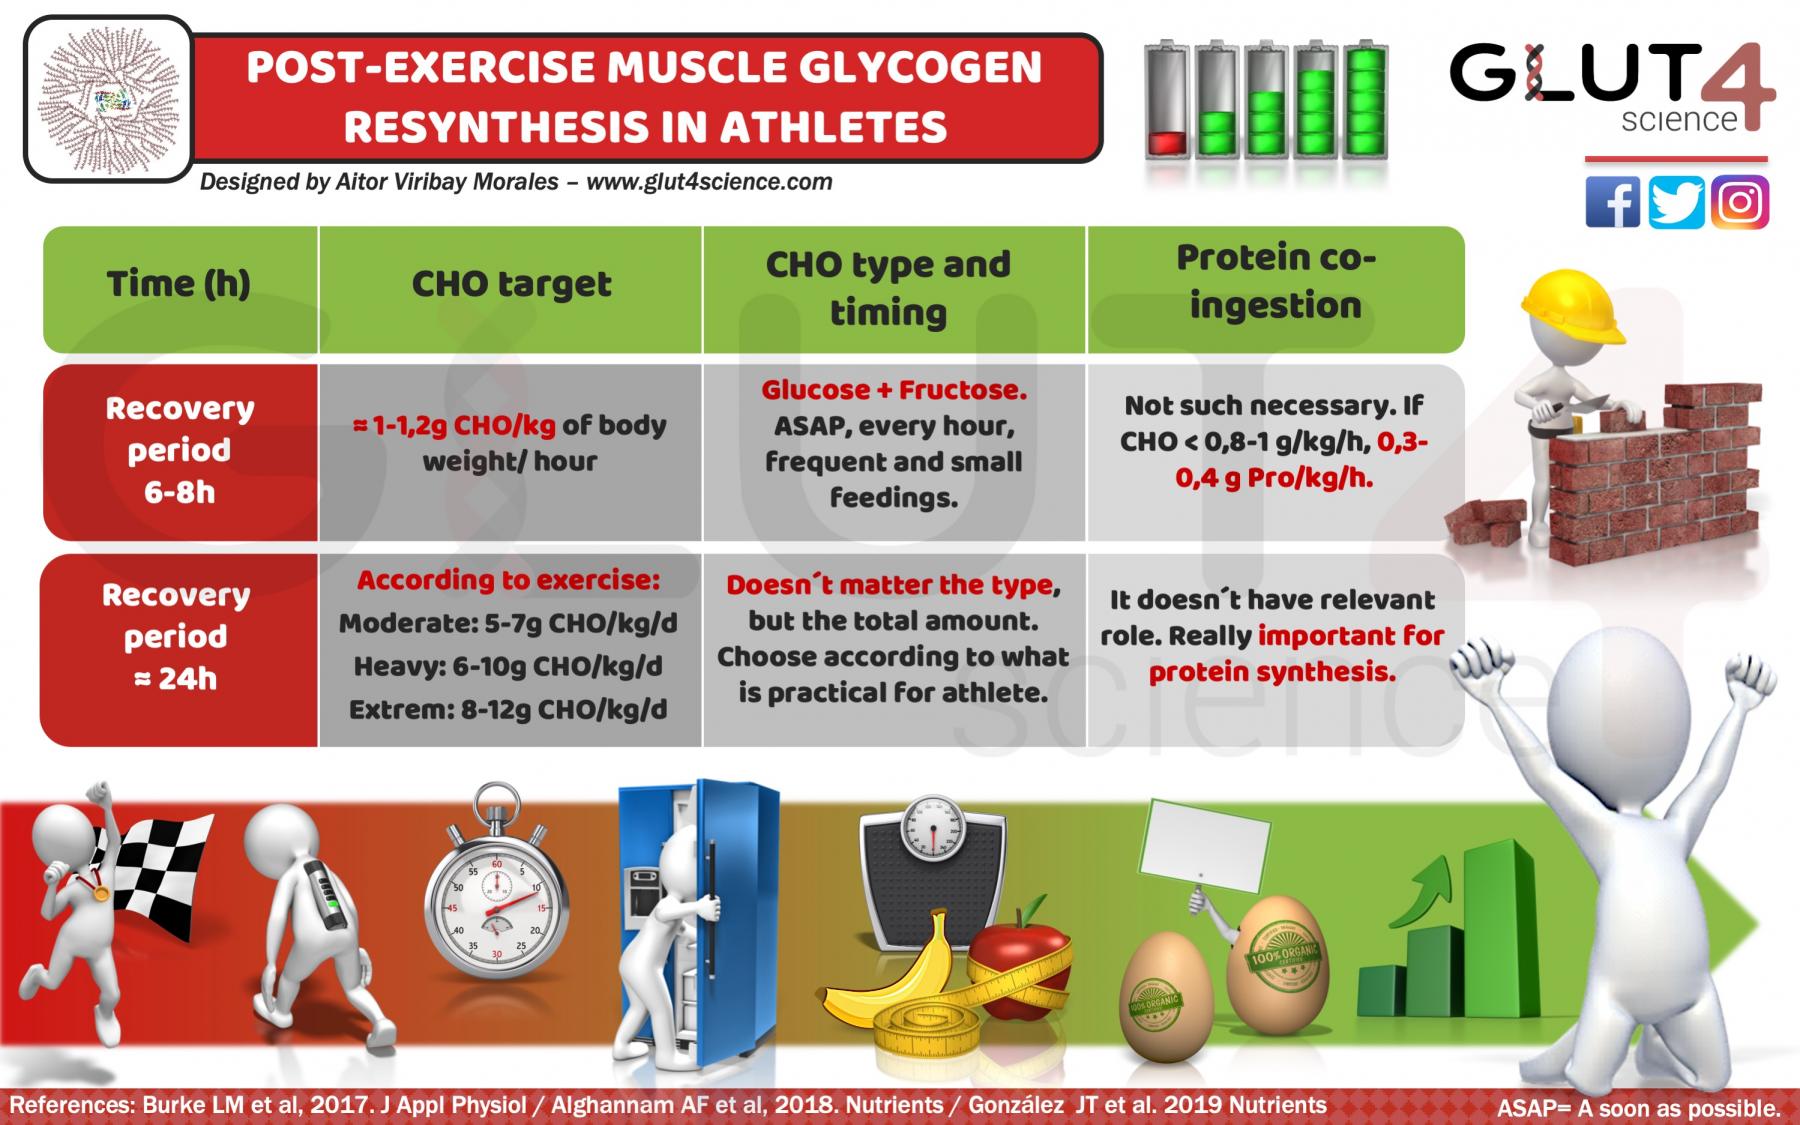 Glycogen resynthesis after exercise